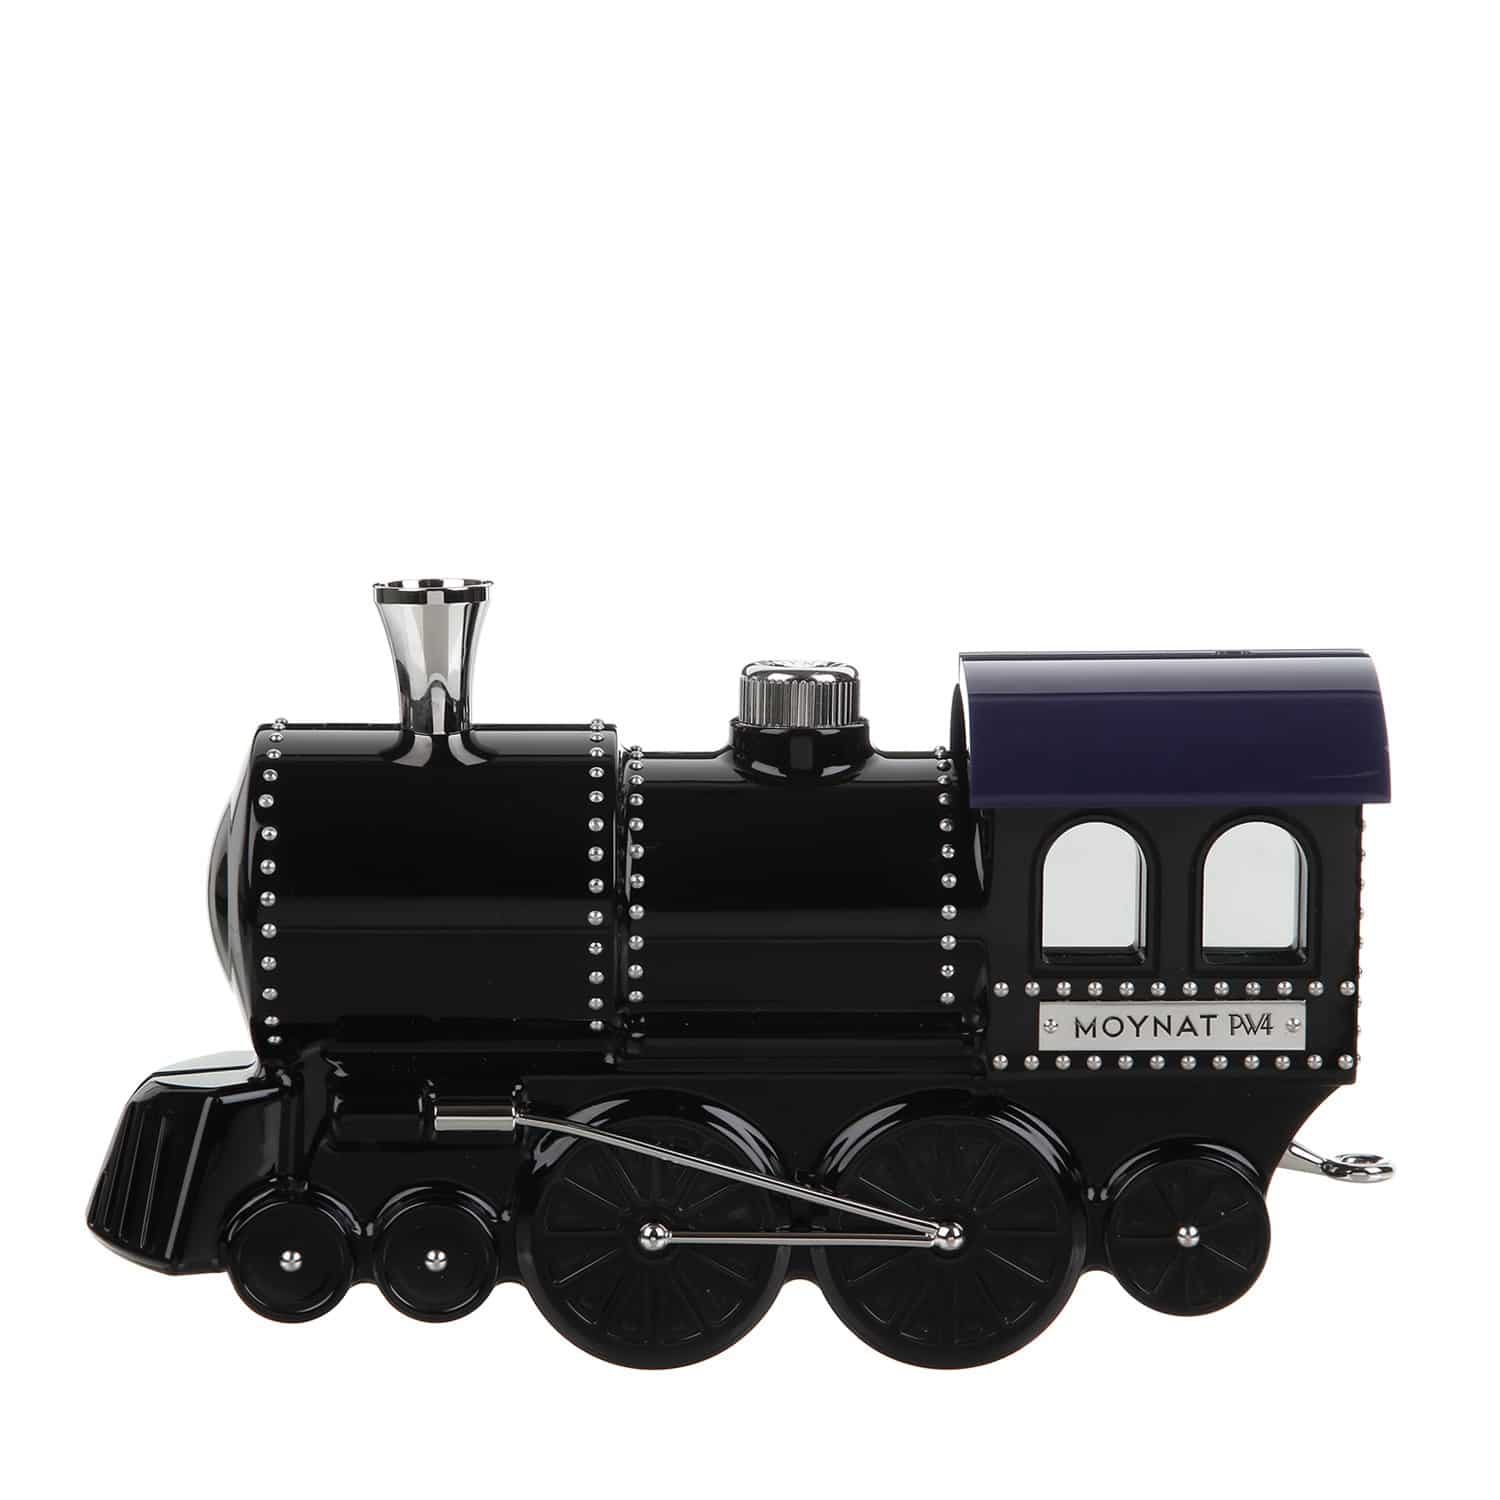 Pharrell collaborates on a collection of luxury handbags shaped like  vintage TRAINS